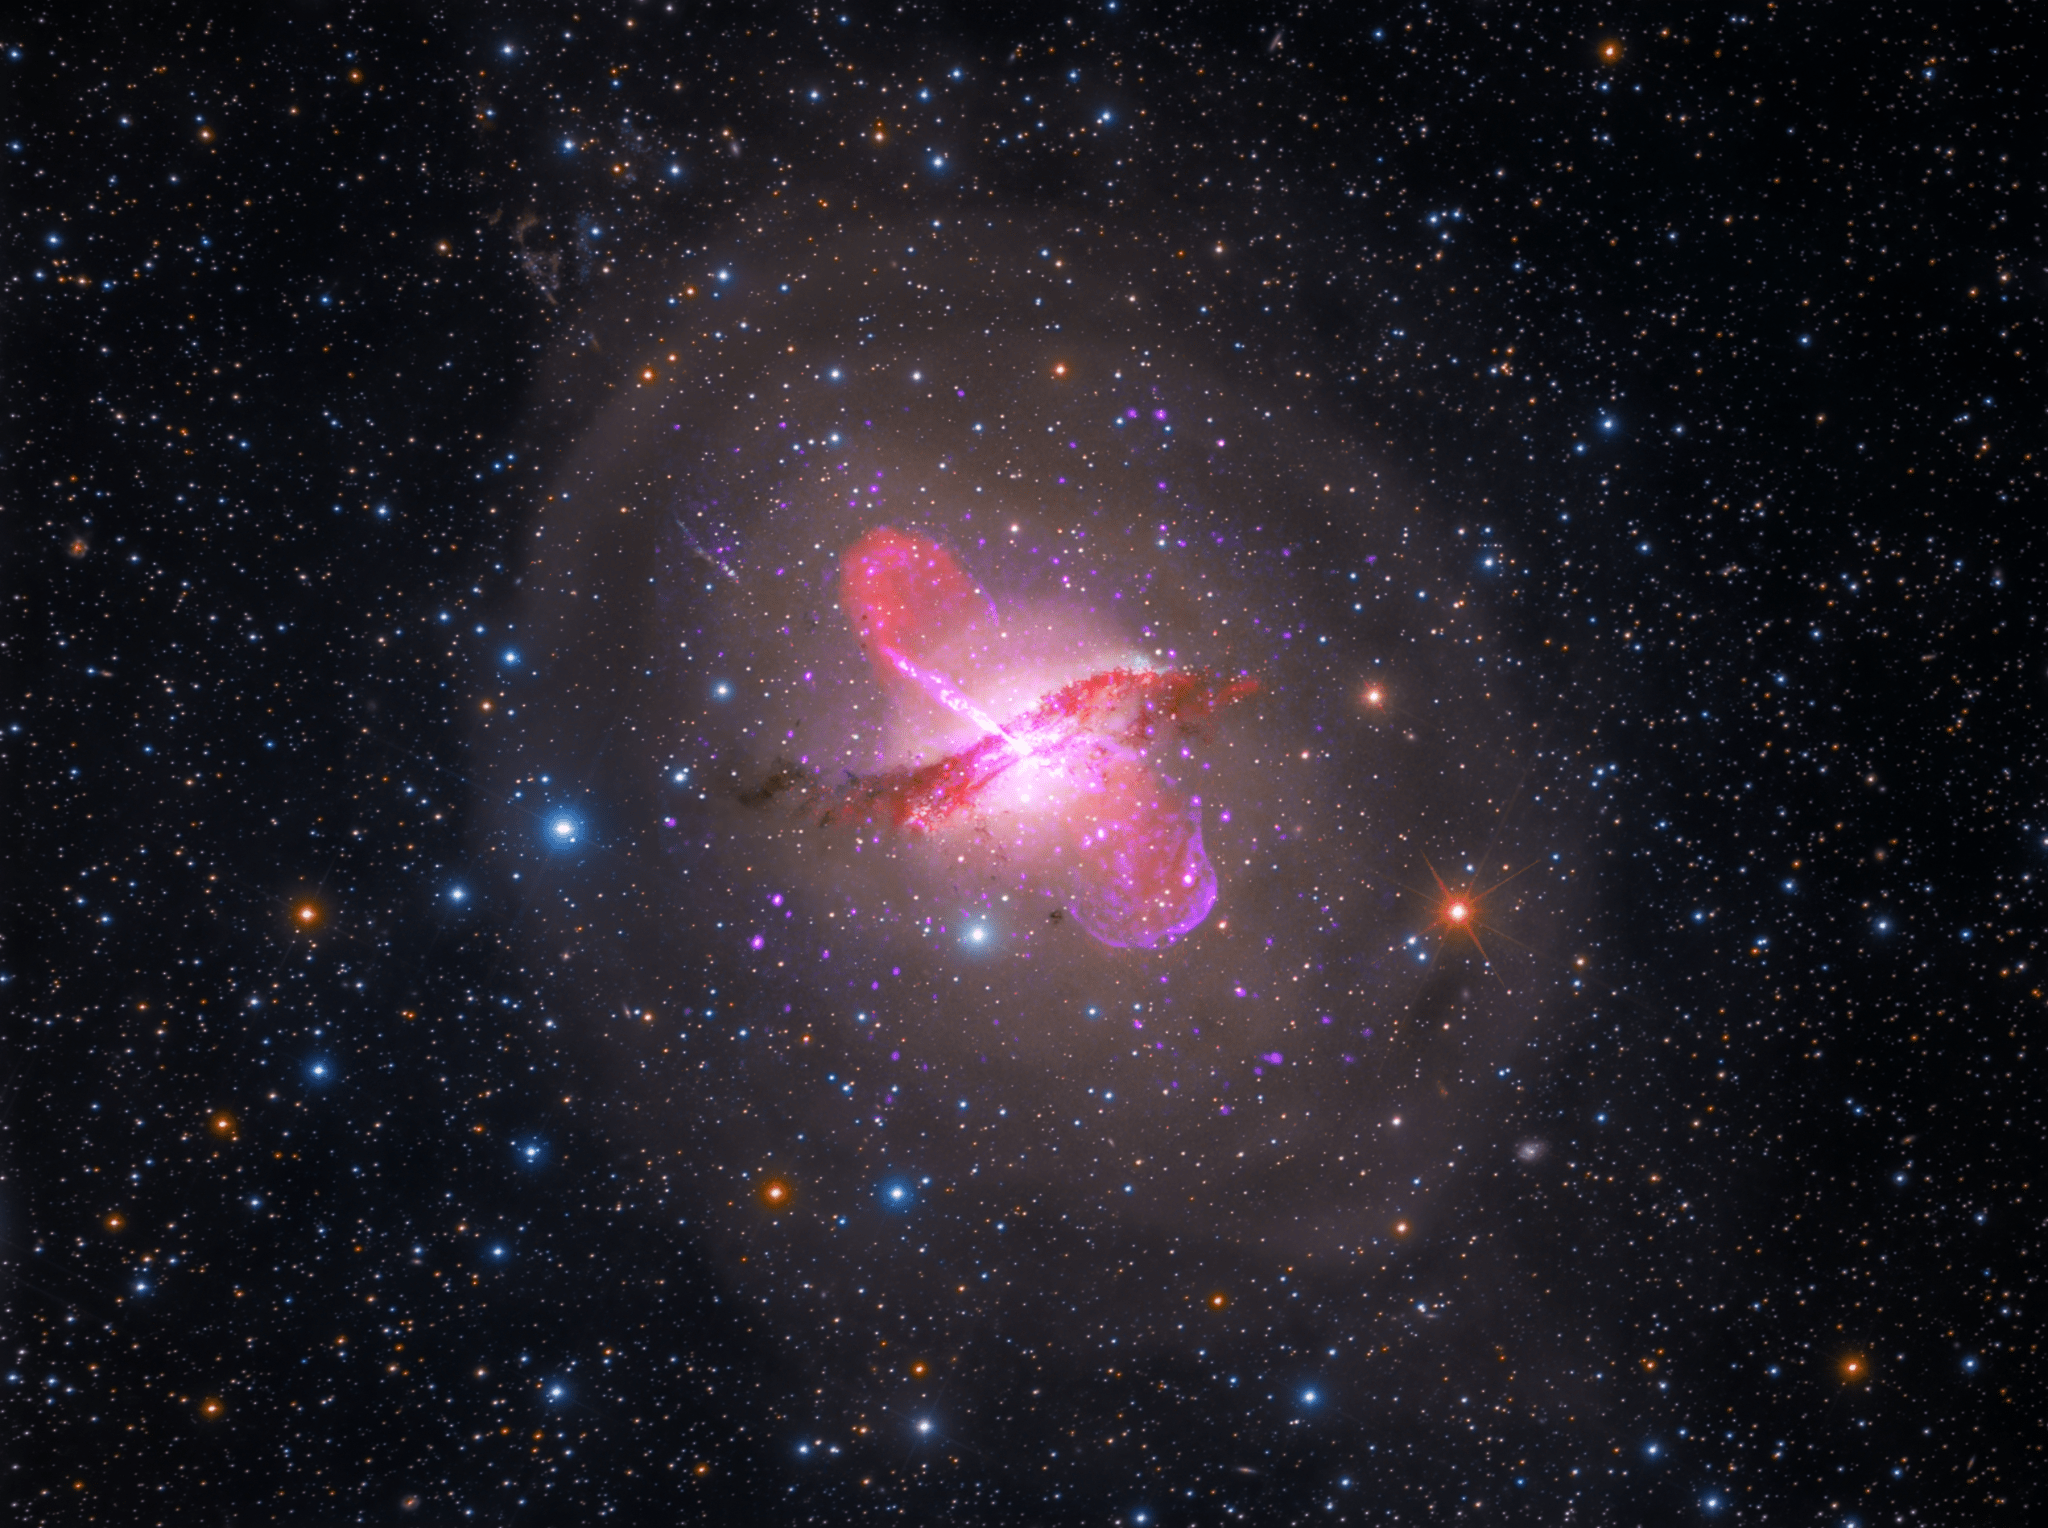 Centaurus A sports a warped central disk of gas and dust, which is evidence of a past collision and merger with another galaxy.